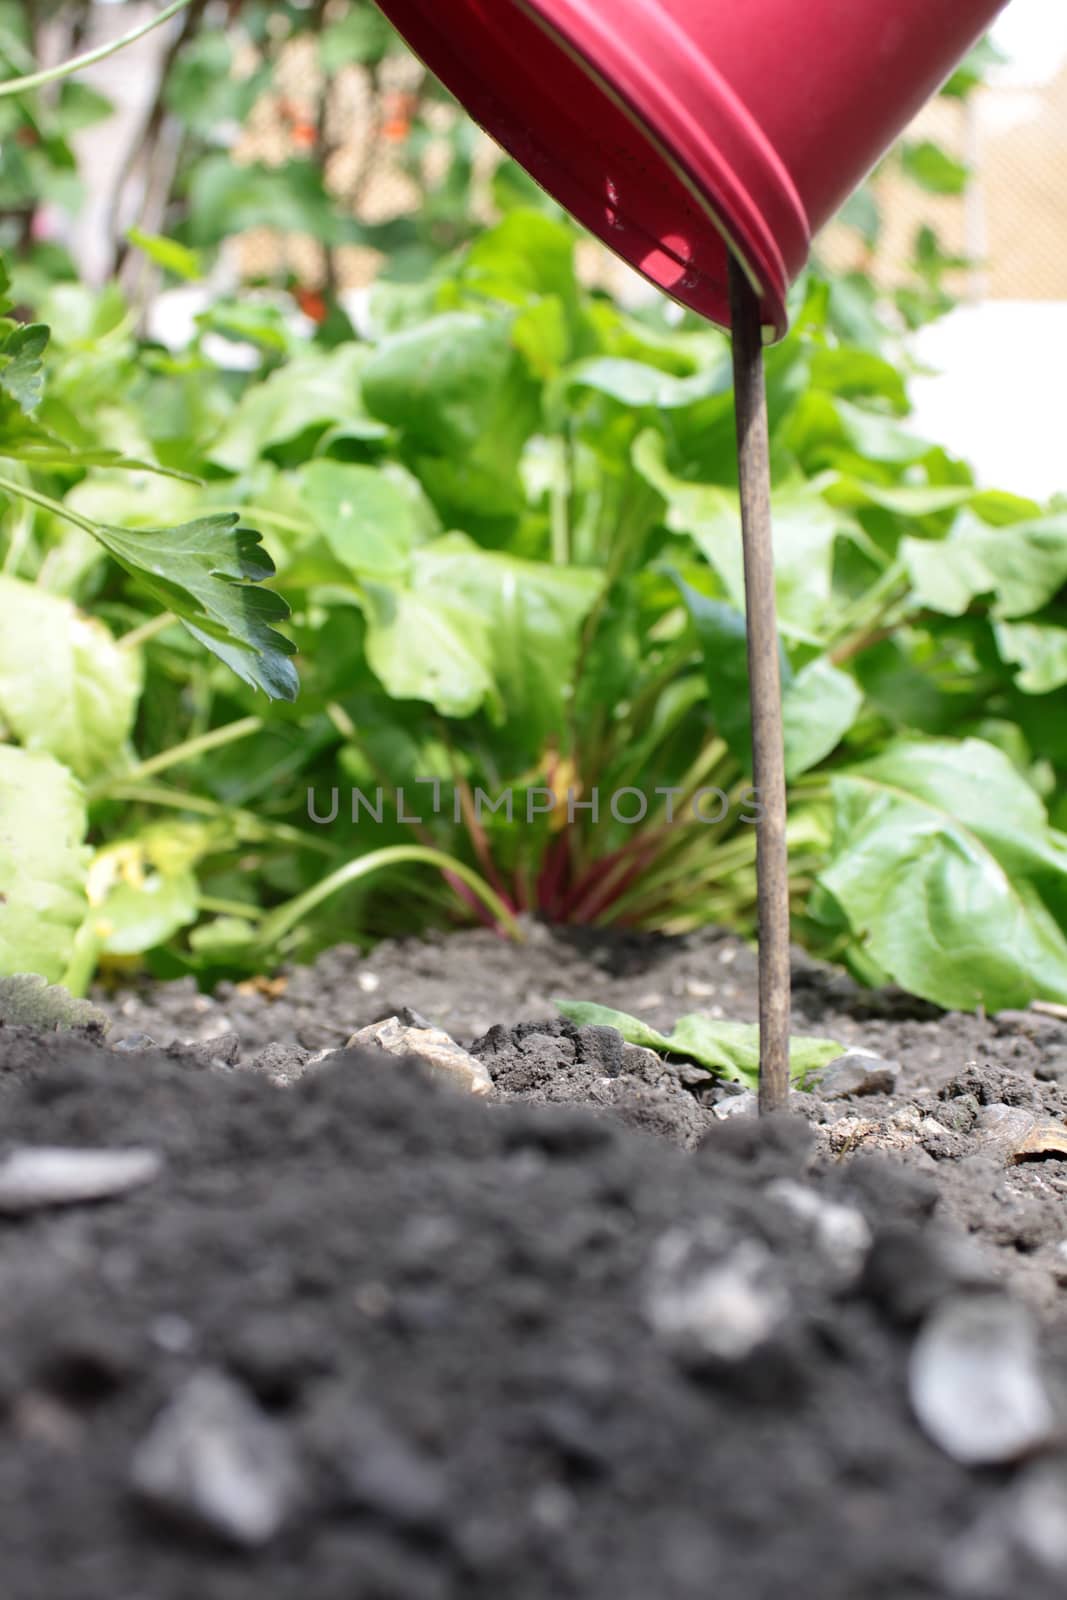 A single red plastic plant pot on a wooden stick in a suburban vegetable garden setting. Used as a marker in front of the green shooting leaves of some Beetroot. Viewed from a low angle through the garden soil.